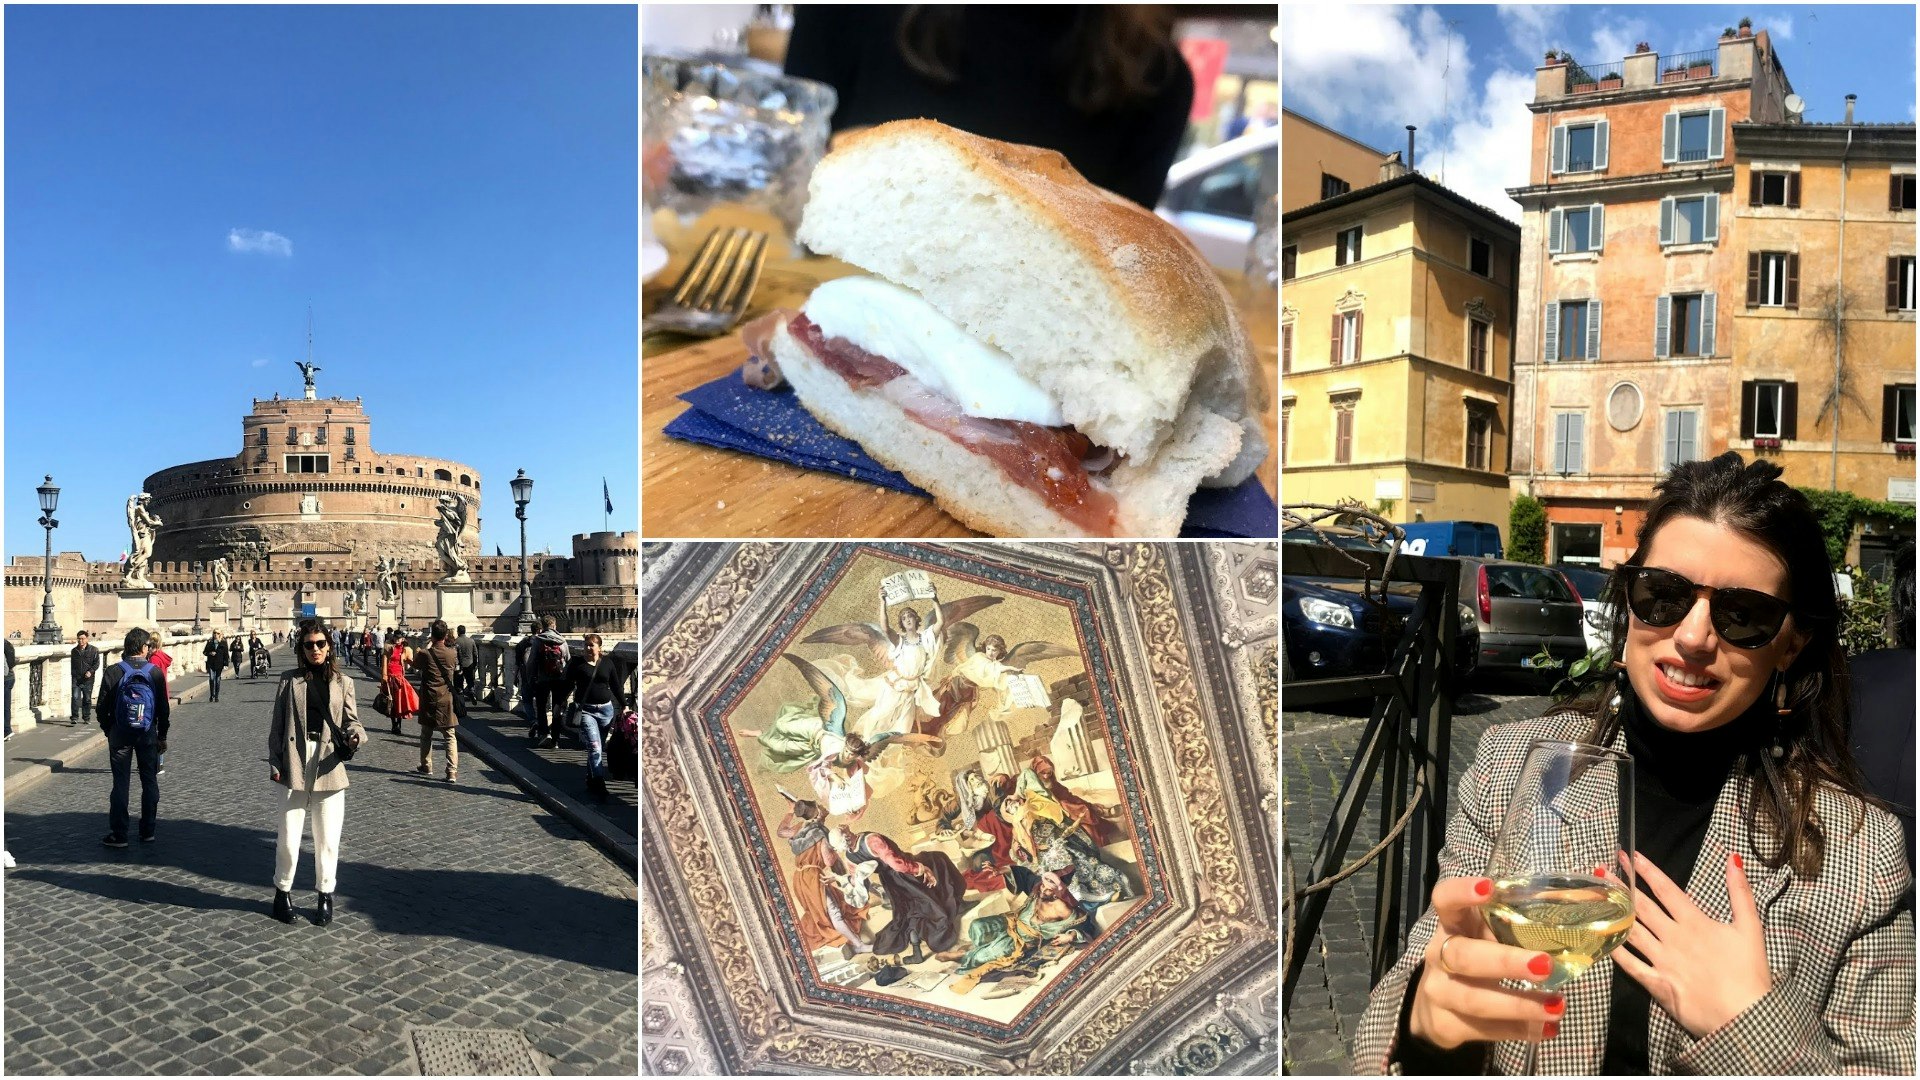 Rome budget - Sasha standing in front of a military museum, a parma ham and mozzarella bap, an al fresco painting and Sasha sinking another glass of white wine